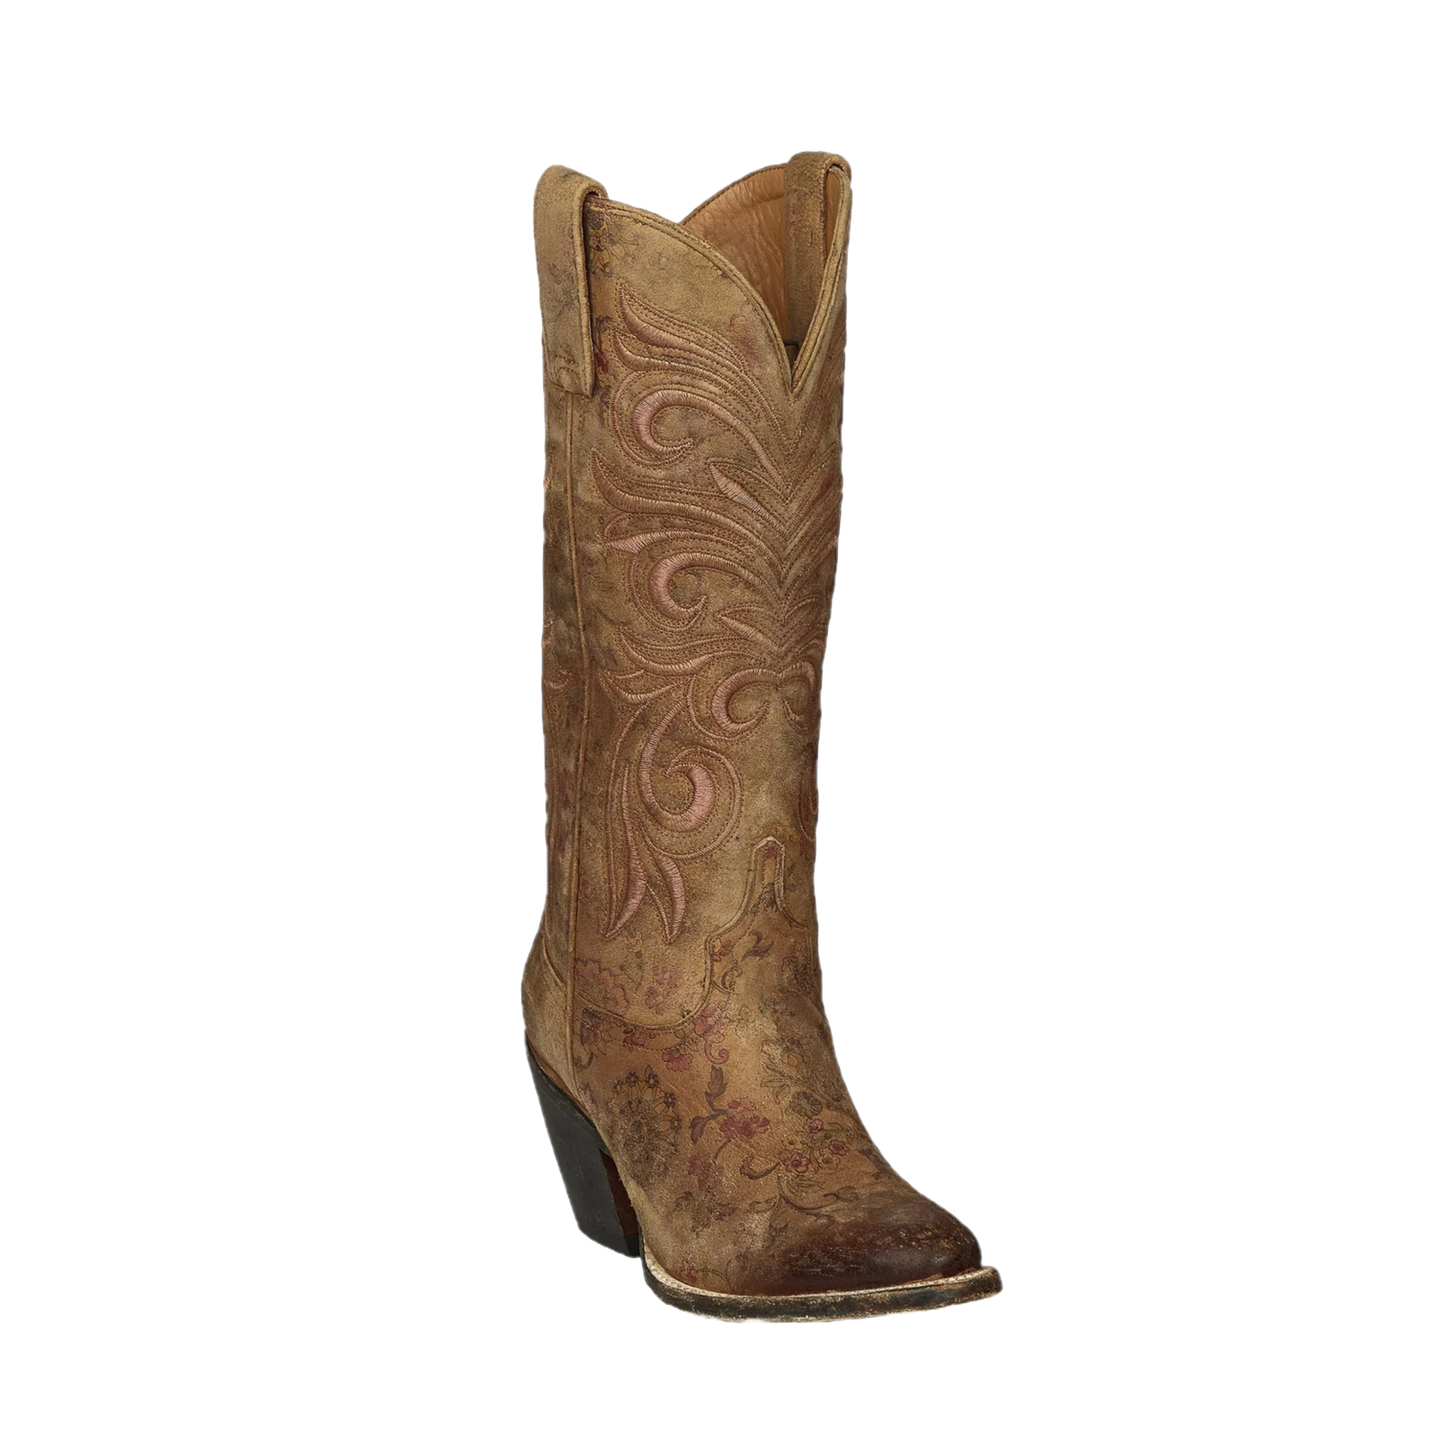 Lucchese Ladies Laurelie Tan Floral Tall Boots M4951